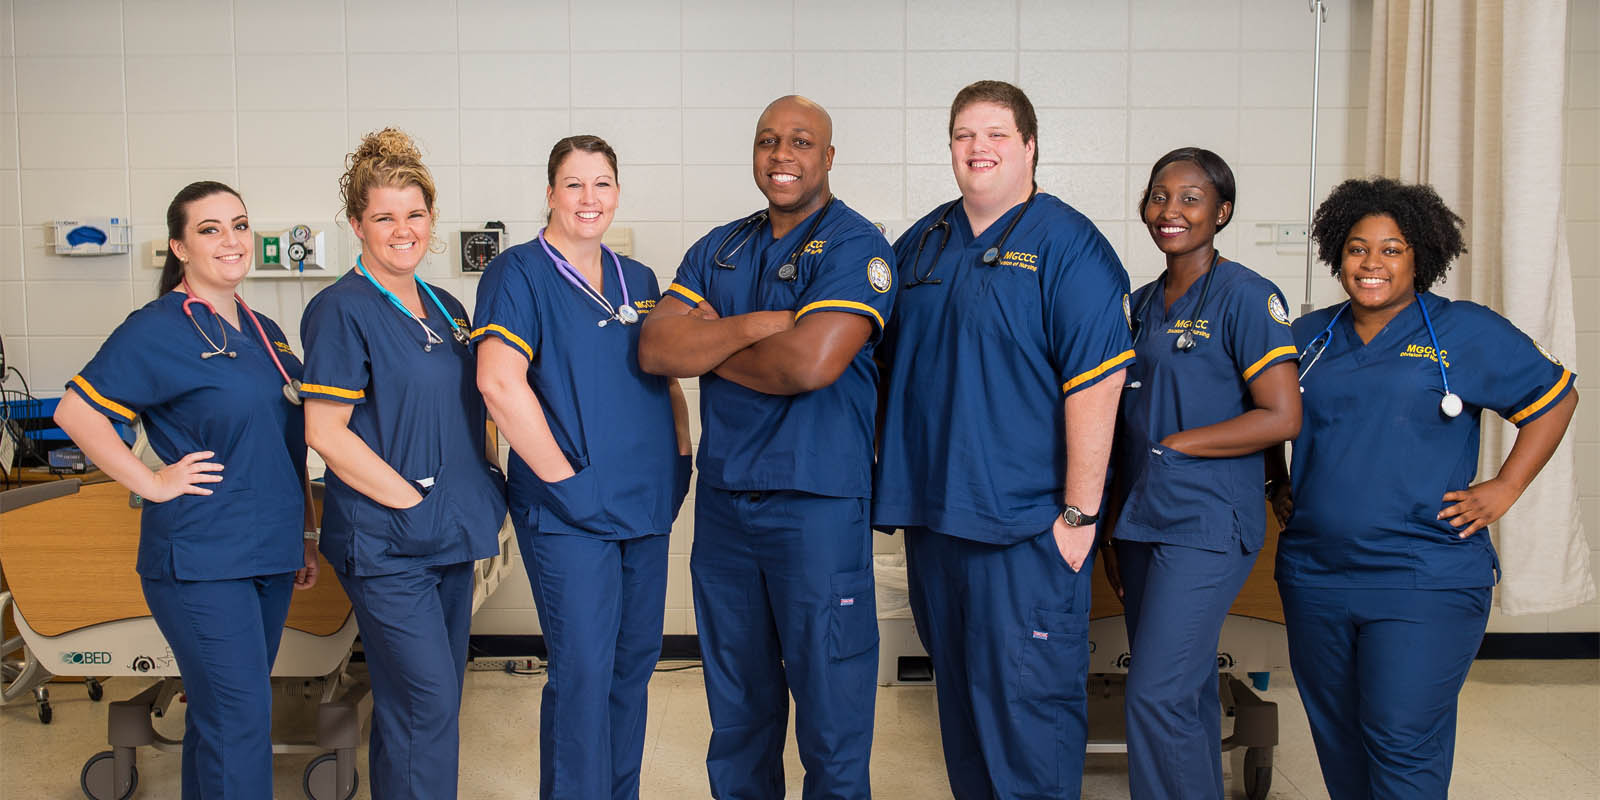 Seven students from the ADN nursing program dressed in their clinical uniforms stand in the skills lab.